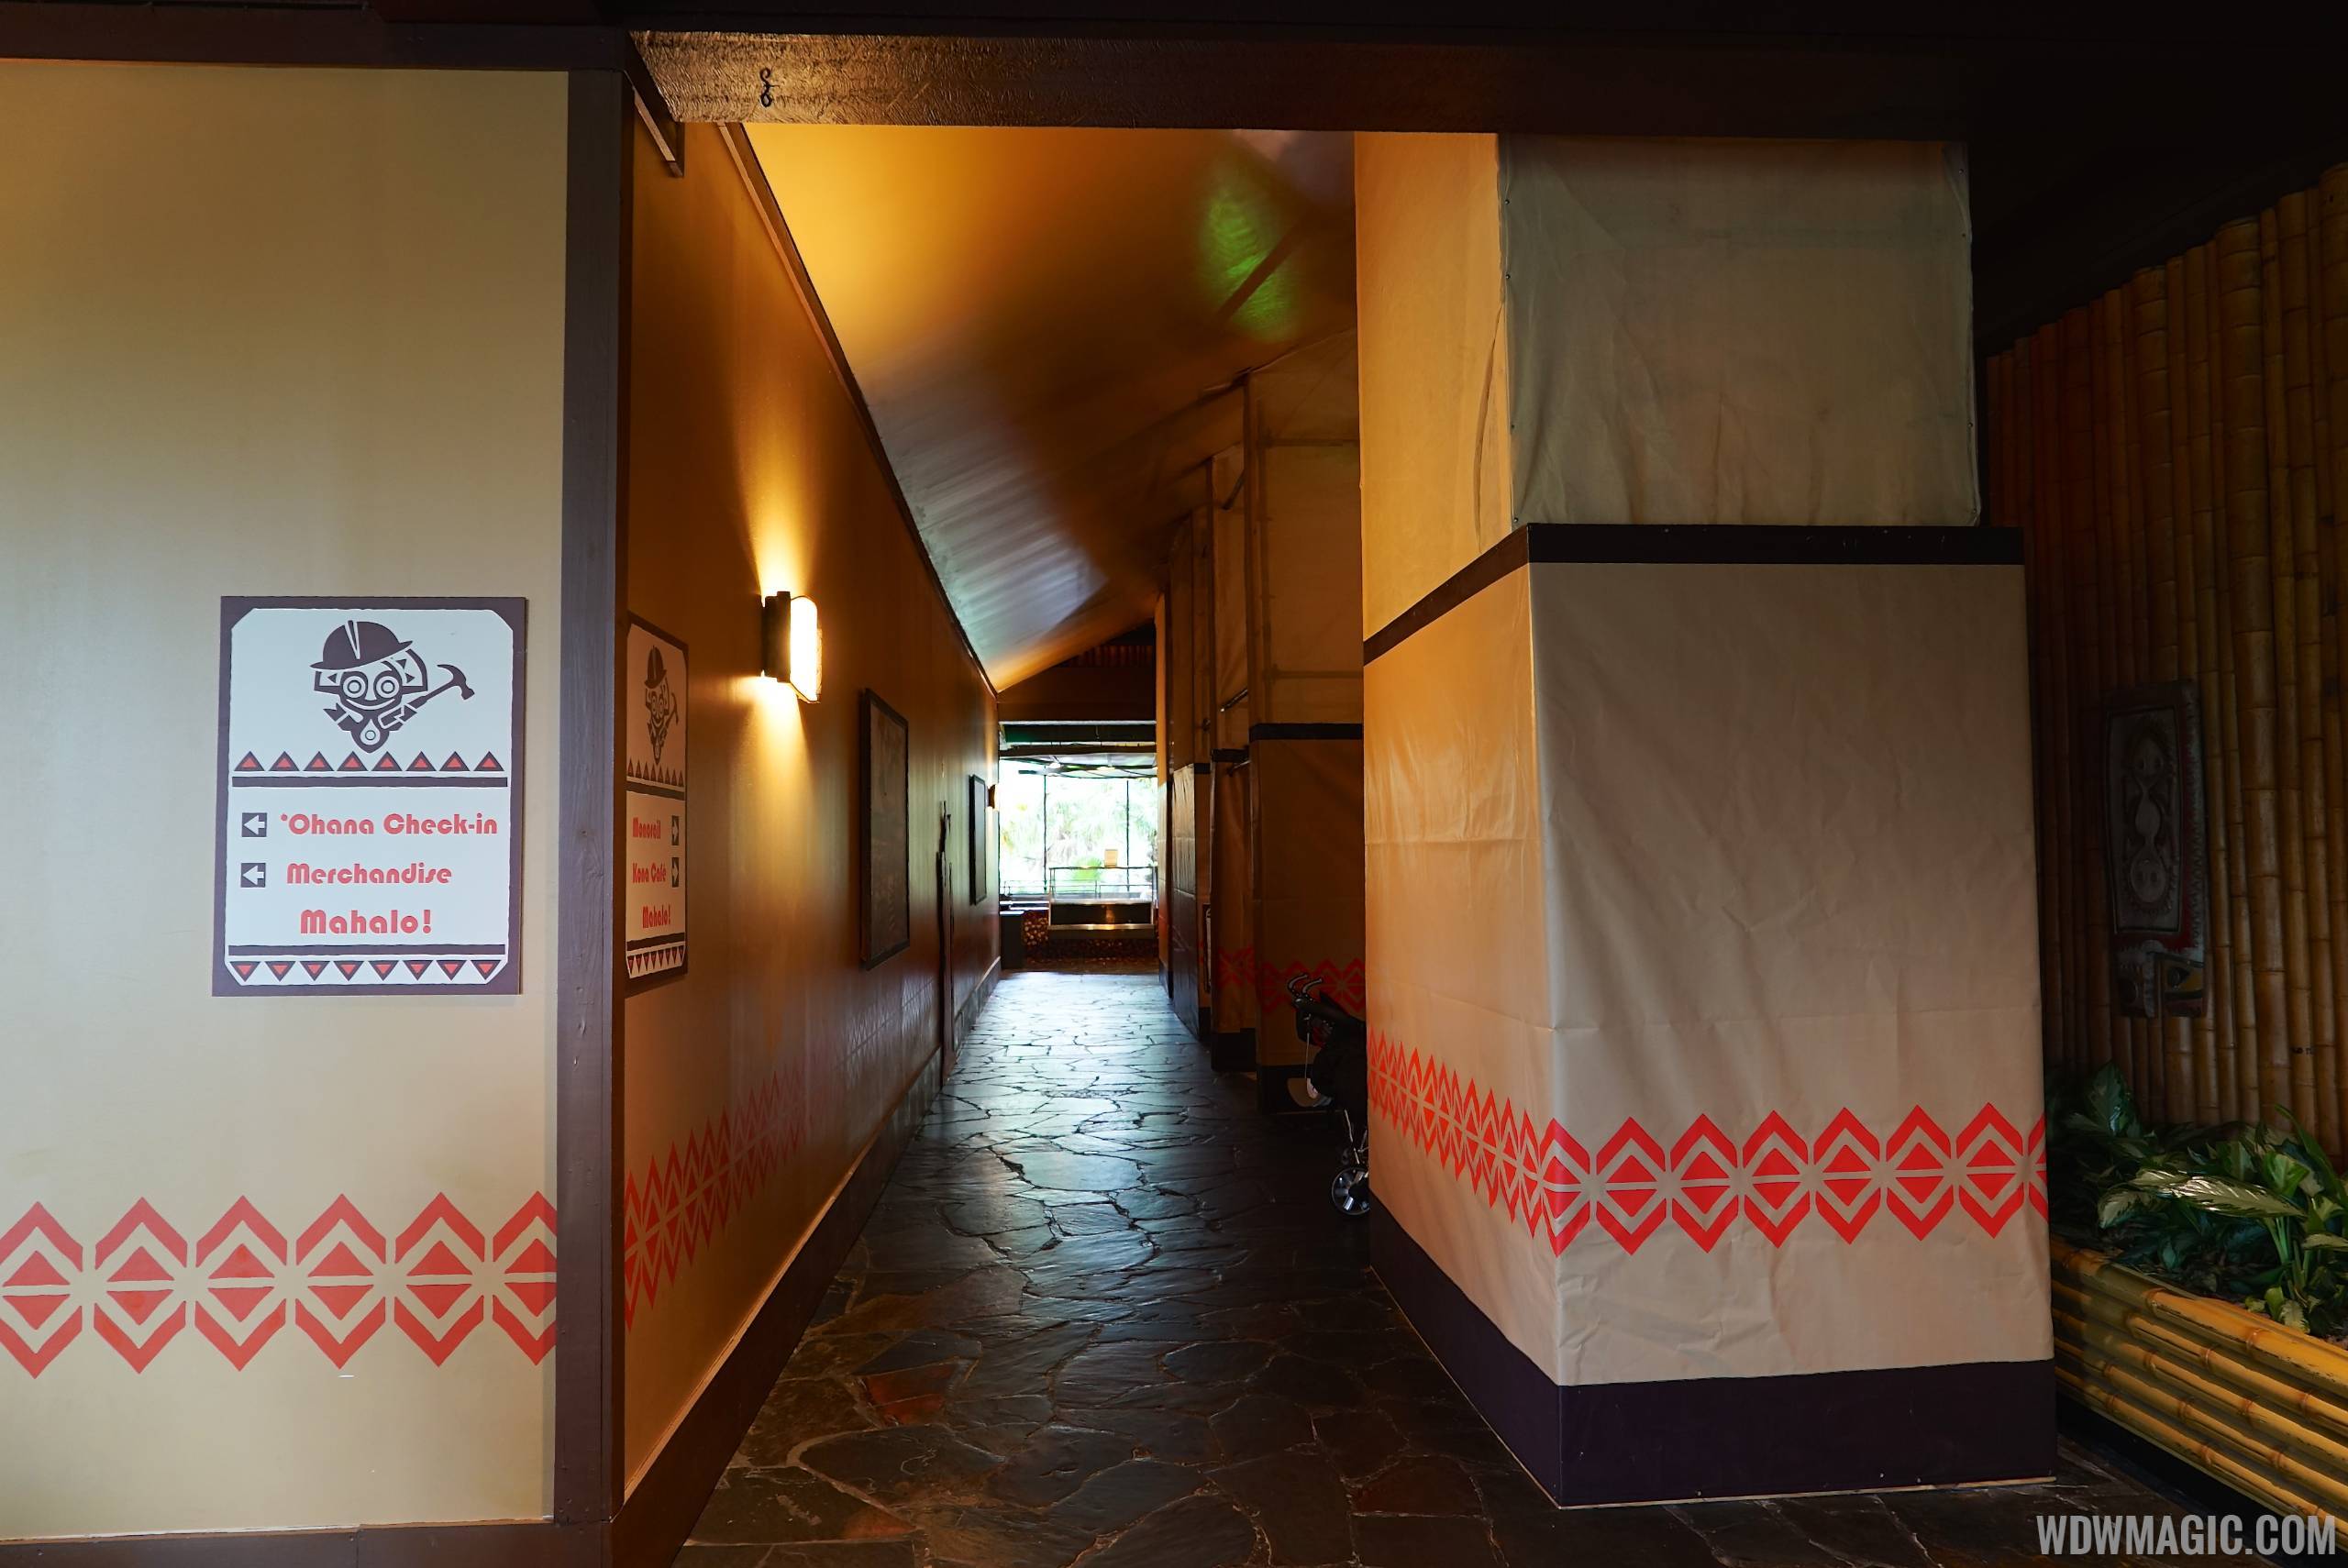 PHOTOS - More construction walls up in the Great Ceremonial House at Disney's Polynesian Village Resort